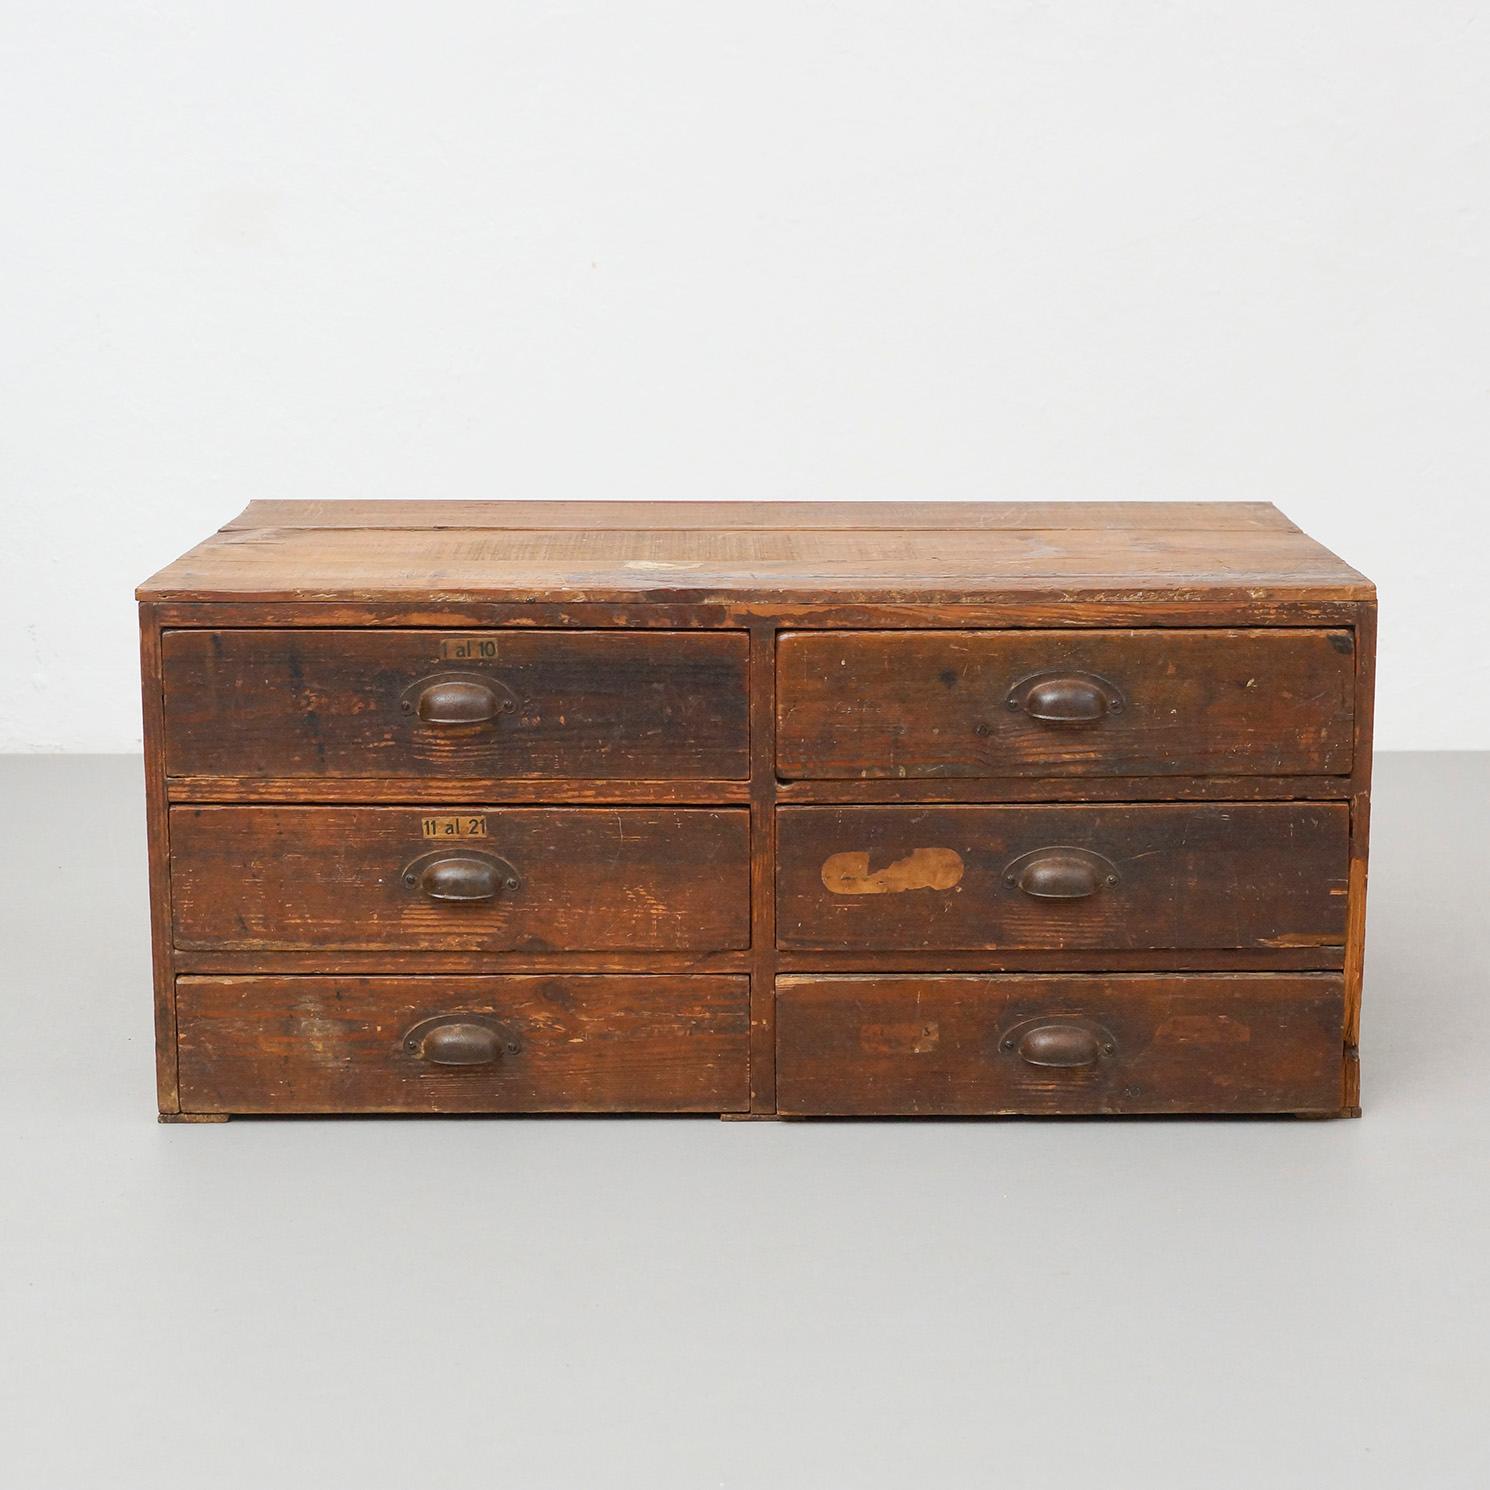 Antique Letterpress Cabinet with 700 Wooden Pieces, Spain circa 1950.

In original condition, wear consistent with age and use, preserving a beautiful patina.

Materials:
Wood
Metal

Dimensions:
D 44 cm x W 65 cm x H 5 cm